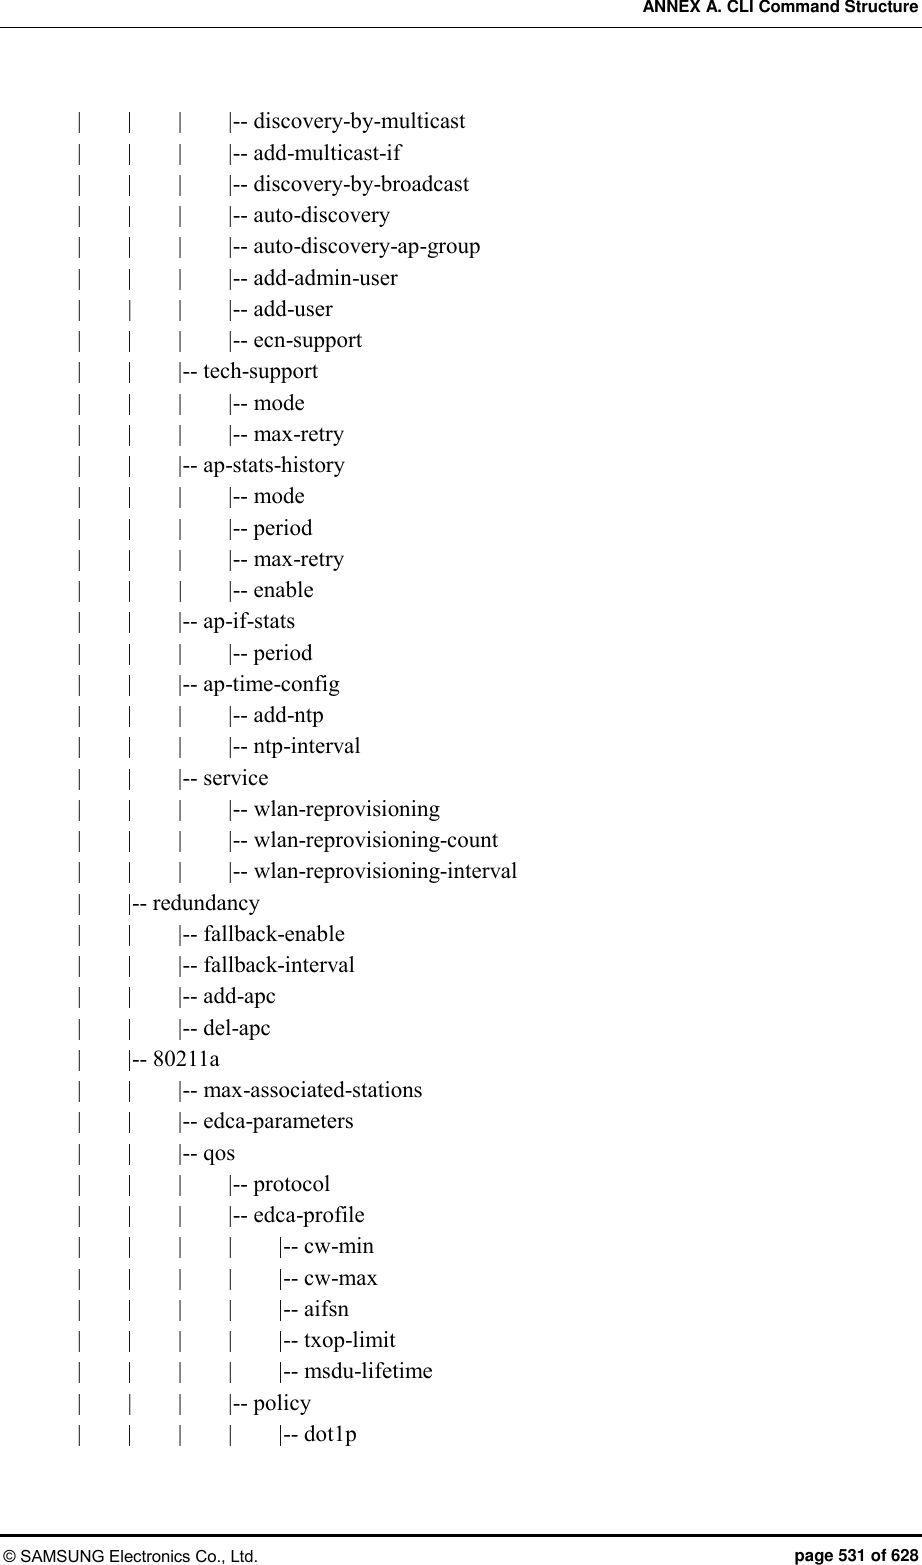 ANNEX A. CLI Command Structure © SAMSUNG Electronics Co., Ltd.  page 531 of 628 |        |        |        |-- discovery-by-multicast |        |        |        |-- add-multicast-if |        |        |        |-- discovery-by-broadcast |        |        |        |-- auto-discovery |        |        |        |-- auto-discovery-ap-group |        |        |        |-- add-admin-user |      |        |        |-- add-user |        |        |        |-- ecn-support |        |        |-- tech-support |        |        |        |-- mode |        |        |        |-- max-retry |        |        |-- ap-stats-history |        |        |        |-- mode |        |        |        |-- period |        |        |        |-- max-retry |        |        |        |-- enable |        |        |-- ap-if-stats |        |        |        |-- period |        |        |-- ap-time-config |        |        |        |-- add-ntp |        |        |        |-- ntp-interval |        |        |-- service |        |        |        |-- wlan-reprovisioning |        |        |        |-- wlan-reprovisioning-count |        |        |        |-- wlan-reprovisioning-interval |        |-- redundancy |        |        |-- fallback-enable |        |        |-- fallback-interval |        |        |-- add-apc |        |        |-- del-apc |        |-- 80211a |        |        |-- max-associated-stations |        |        |-- edca-parameters |        |        |-- qos |        |        |        |-- protocol |        |        |        |-- edca-profile |        |        |        |        |-- cw-min |        |        |        |        |-- cw-max |        |        |        |        |-- aifsn |        |        |        |        |-- txop-limit |        |        |        |        |-- msdu-lifetime |        |        |        |-- policy |        |        |        |        |-- dot1p 